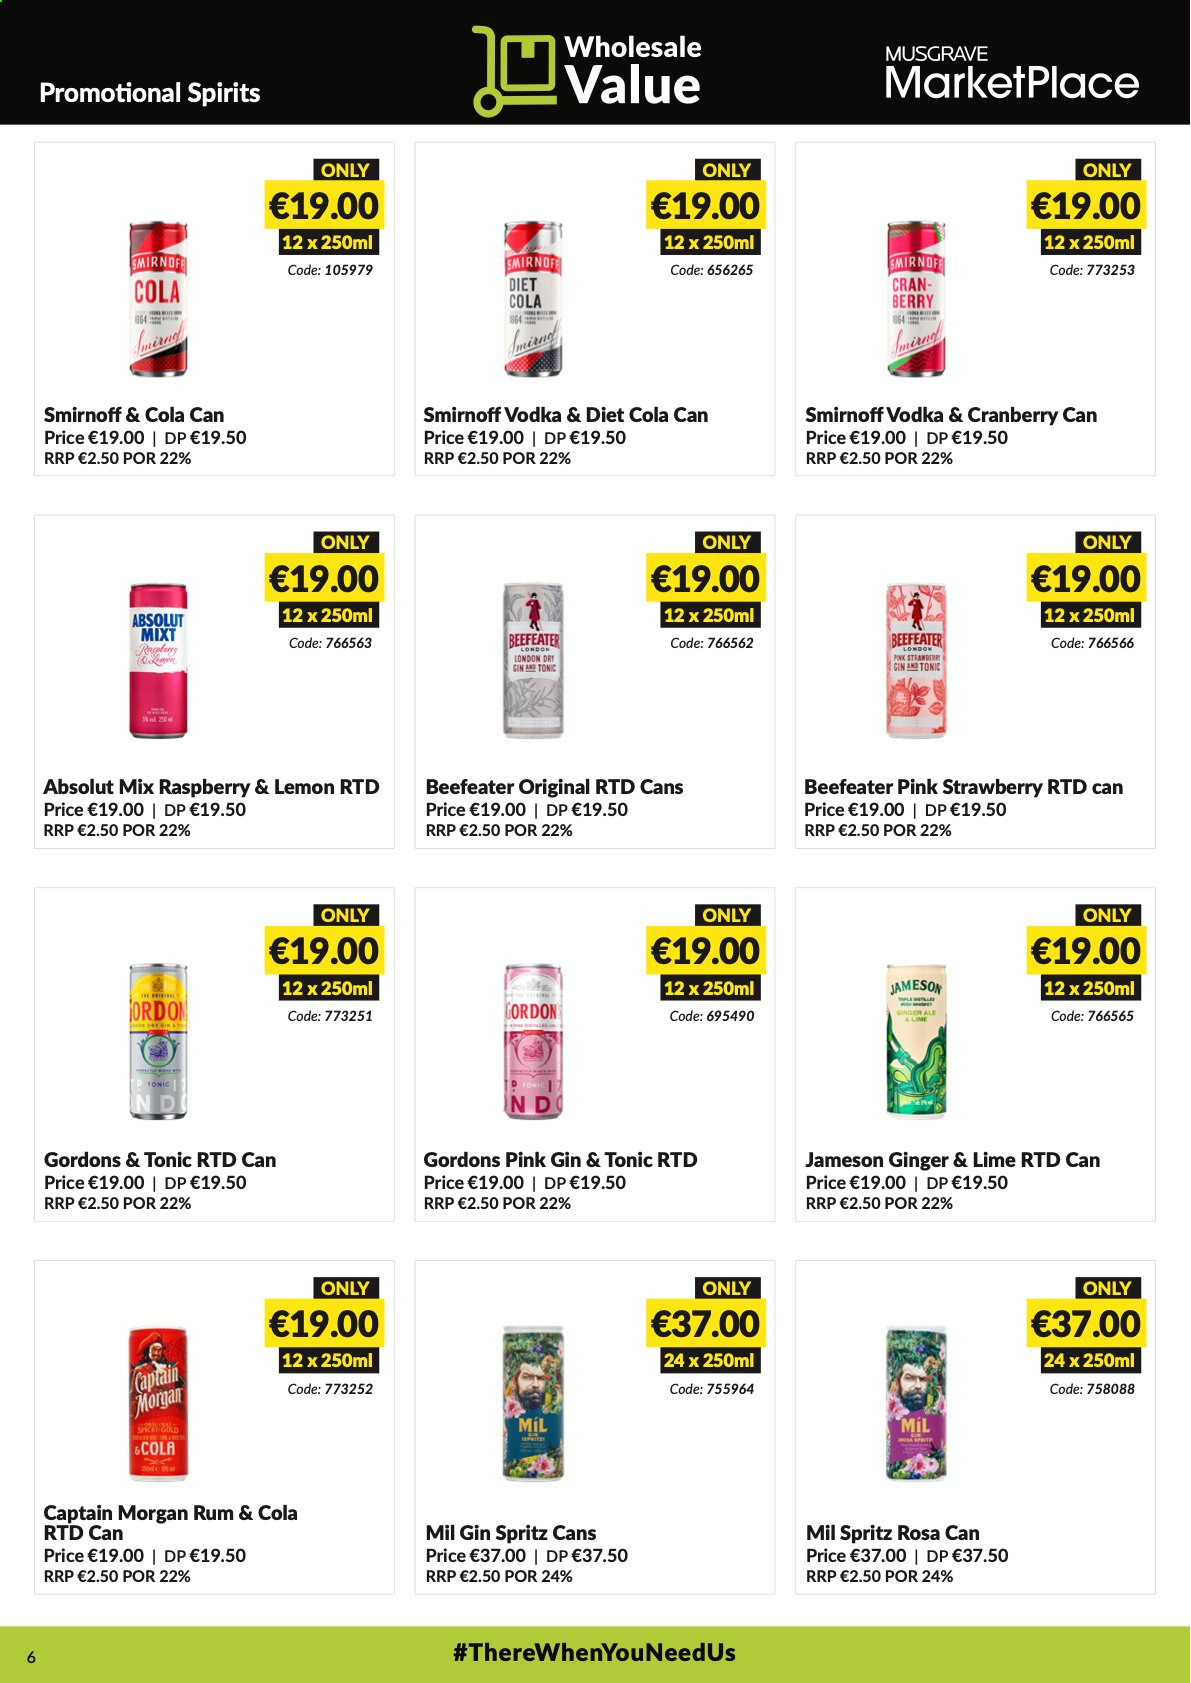 thumbnail - MUSGRAVE Market Place offer  - 09.05.2021 - 05.06.2021 - Sales products - Captain Morgan, rum, Smirnoff, vodka, Jameson, Gordon's, Absolut, Beefeater, gin & tonic. Page 6.